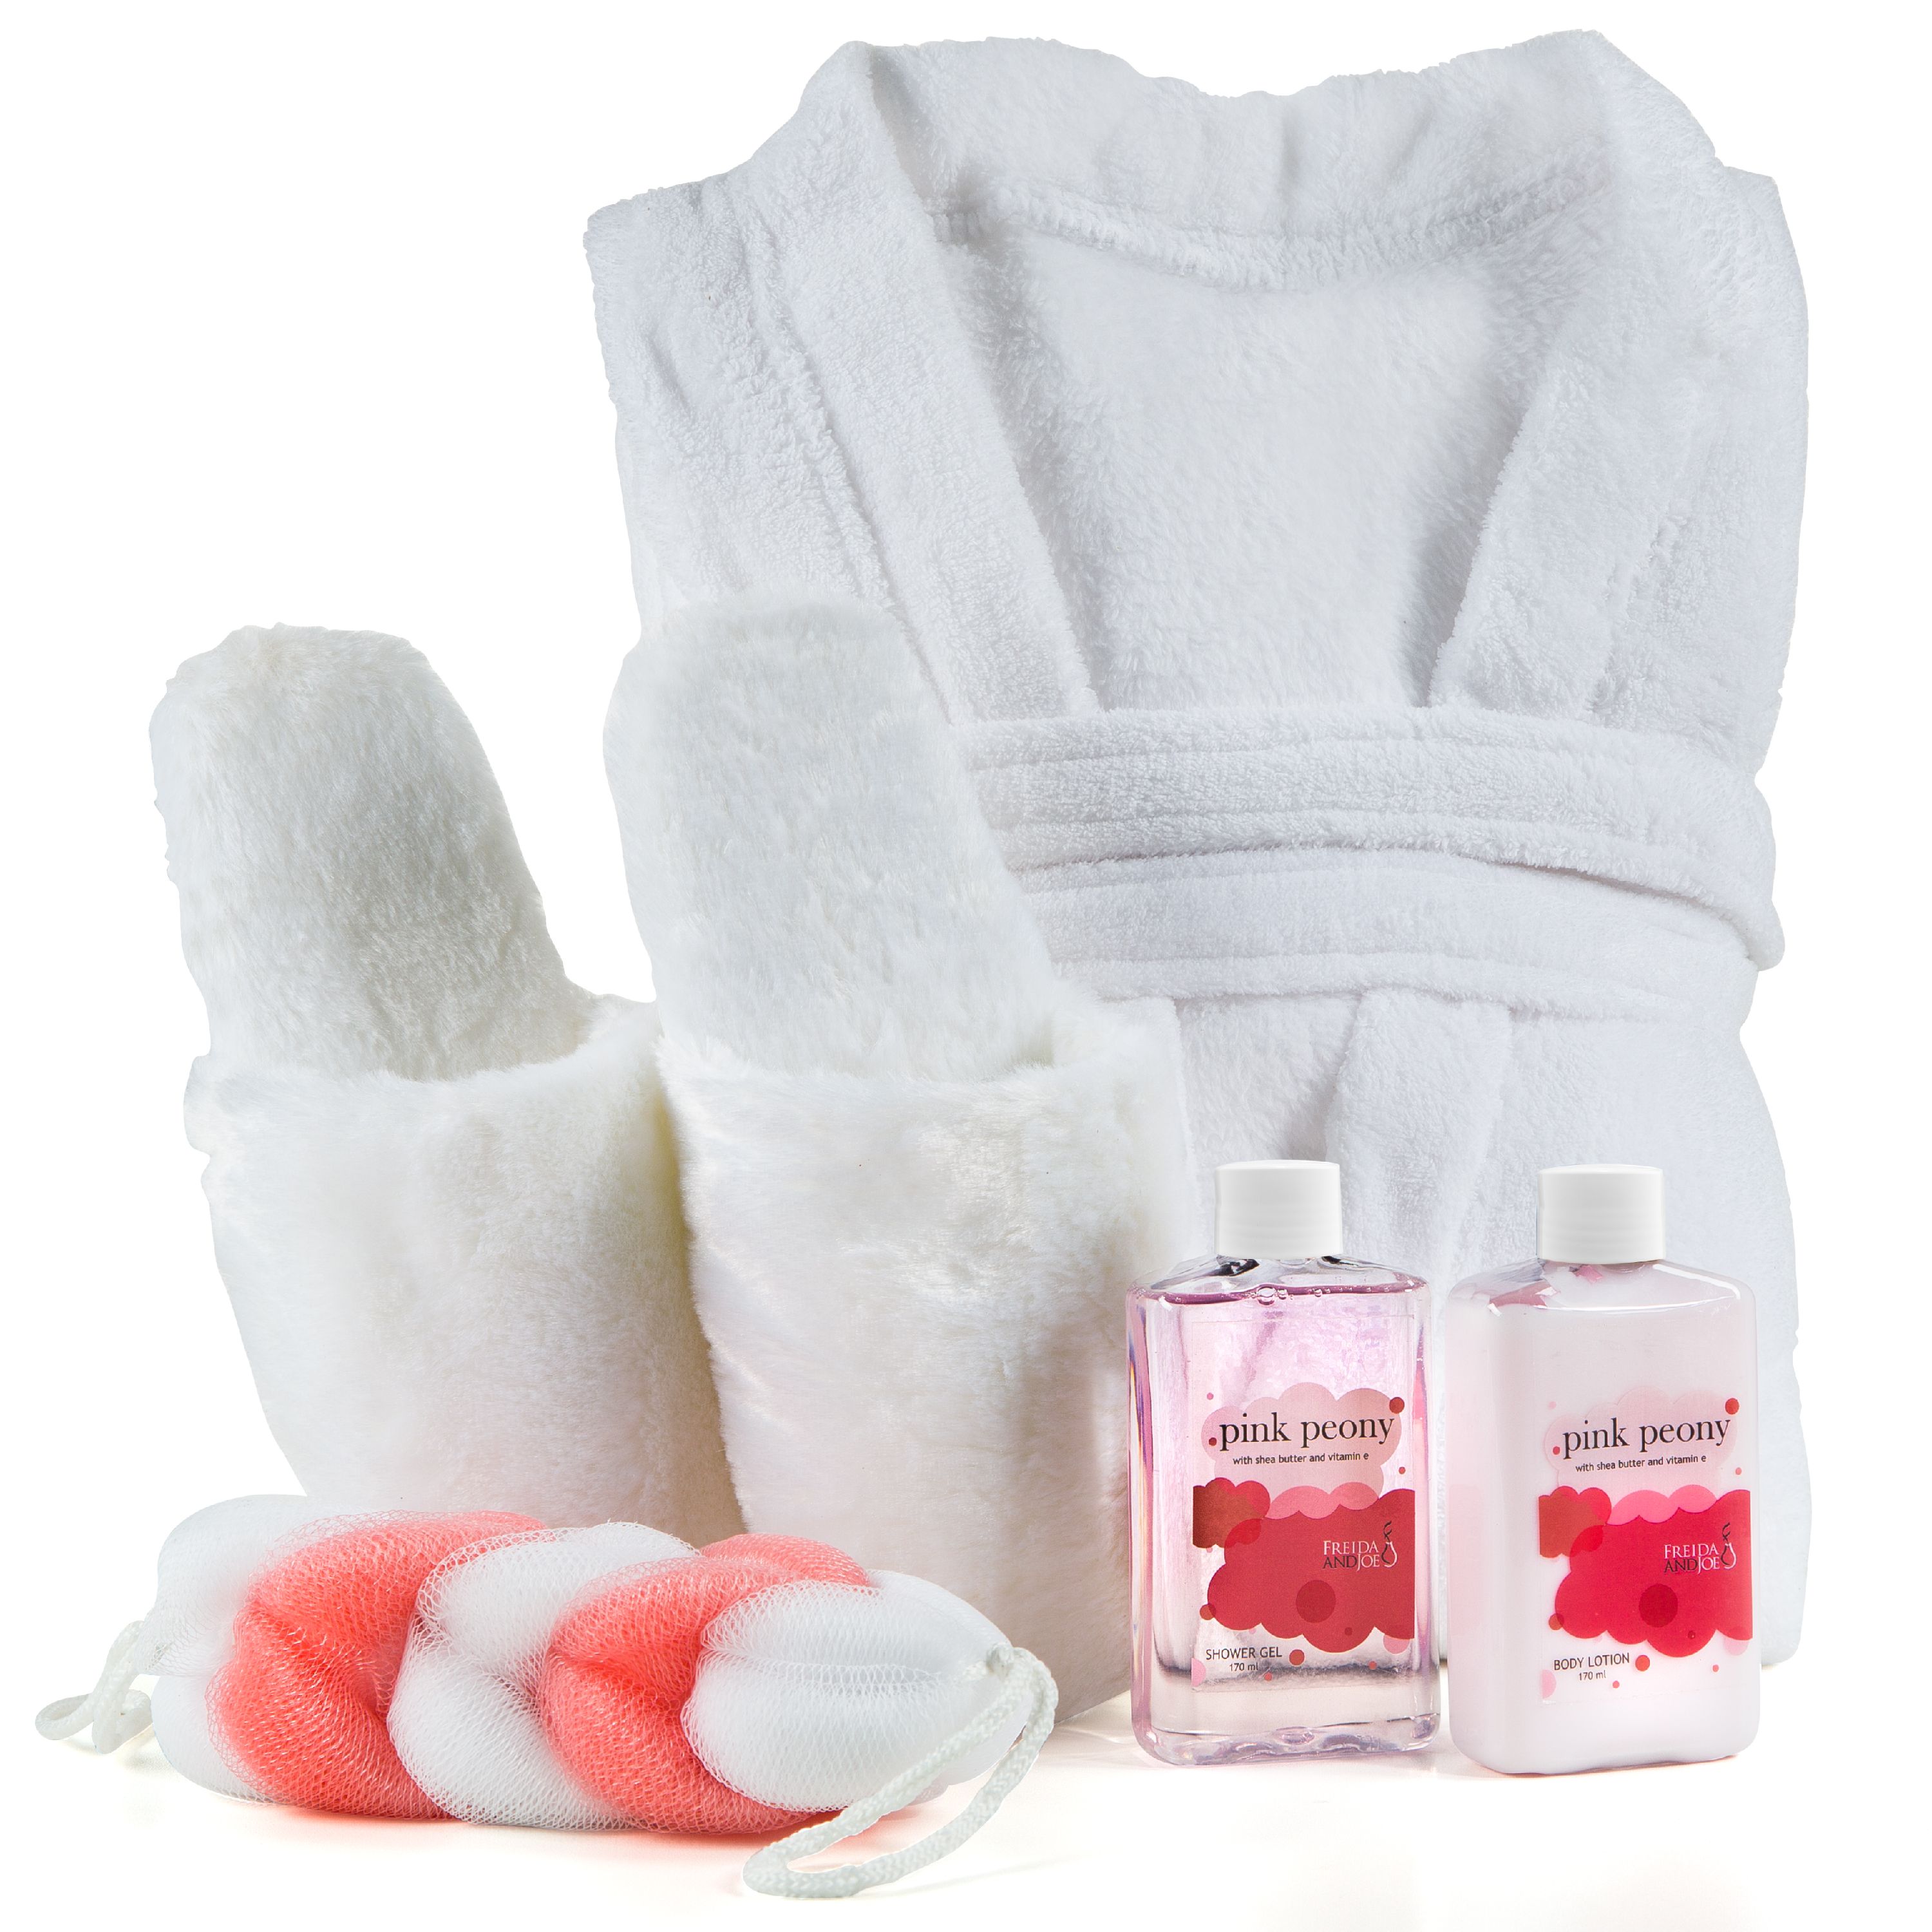 Freida & Joe Gift for Her Pink Peony Scent Home Spa Gift Basket with Luxury Bathrobe & Slipper for Women - image 3 of 5